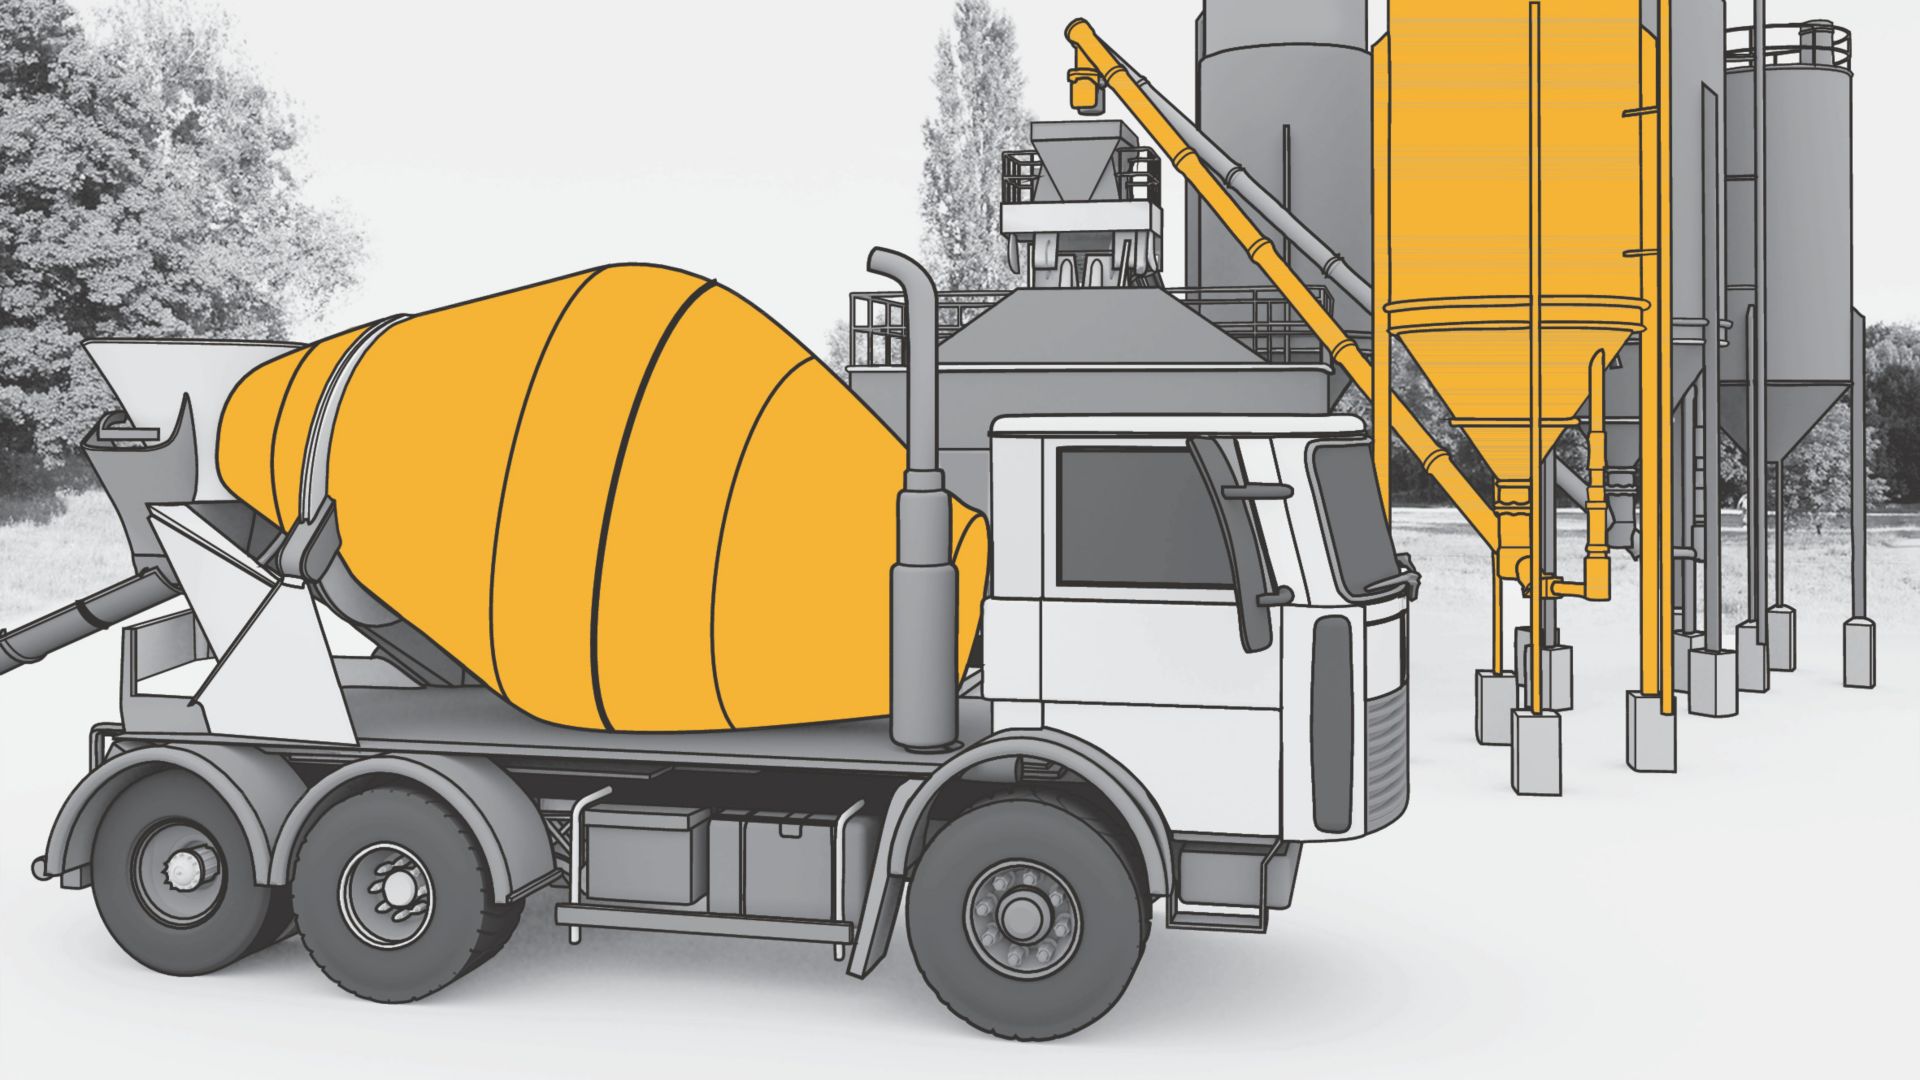 Illustration of Sika concrete production plant with concrete mixer truck